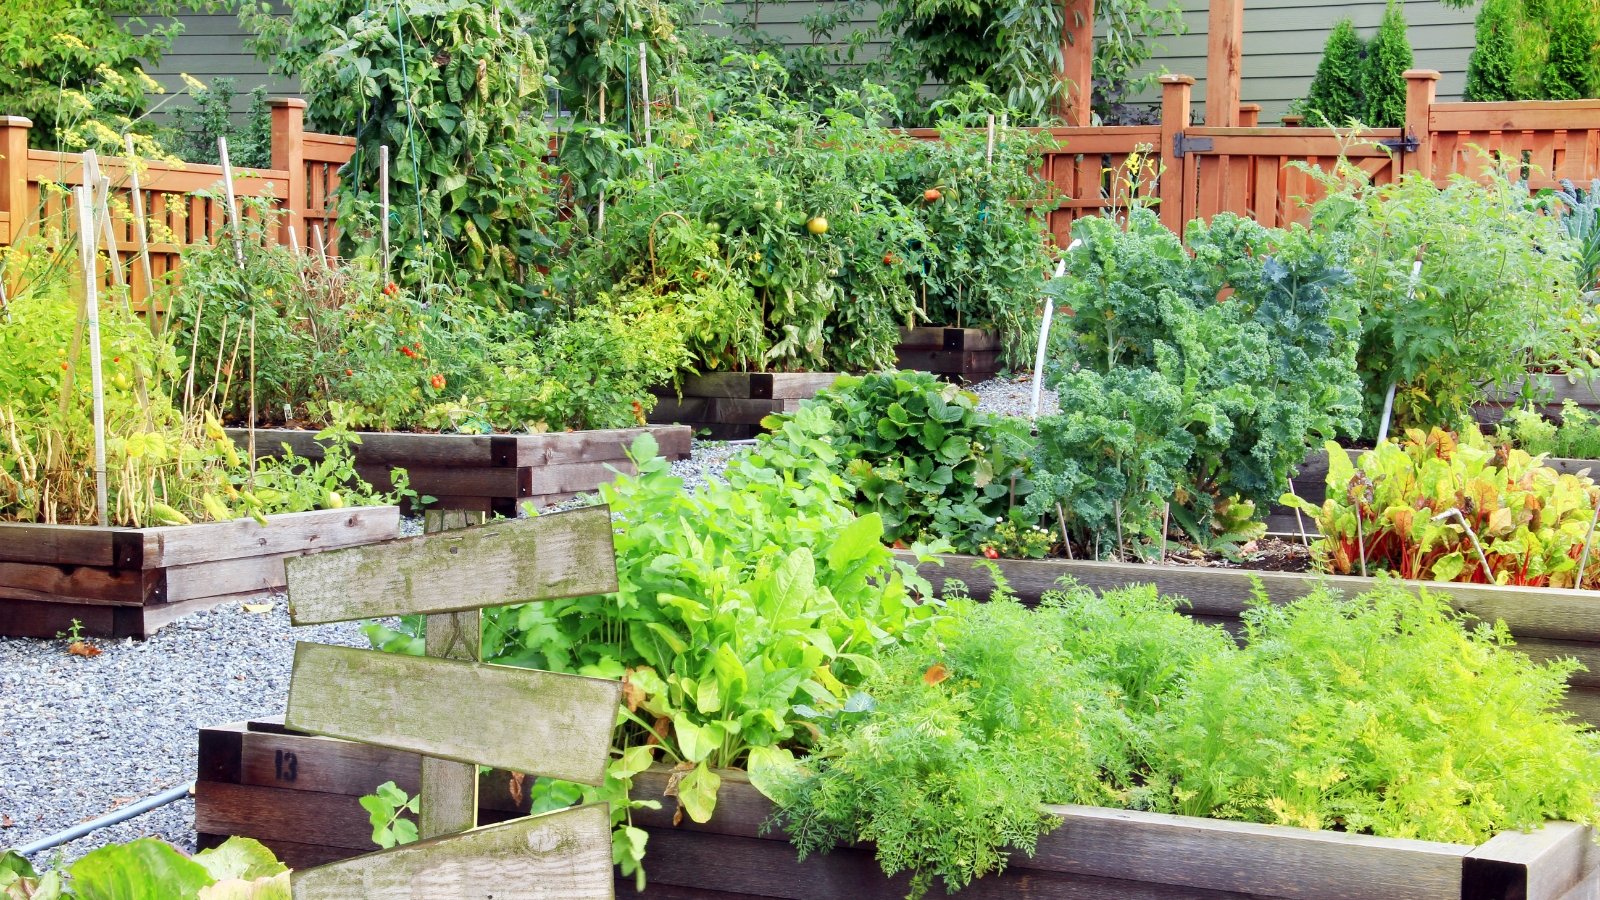 Wooden raised beds in a flourishing garden, adorned with an array of vegetables, promising a harvest brimming with freshness and flavor.